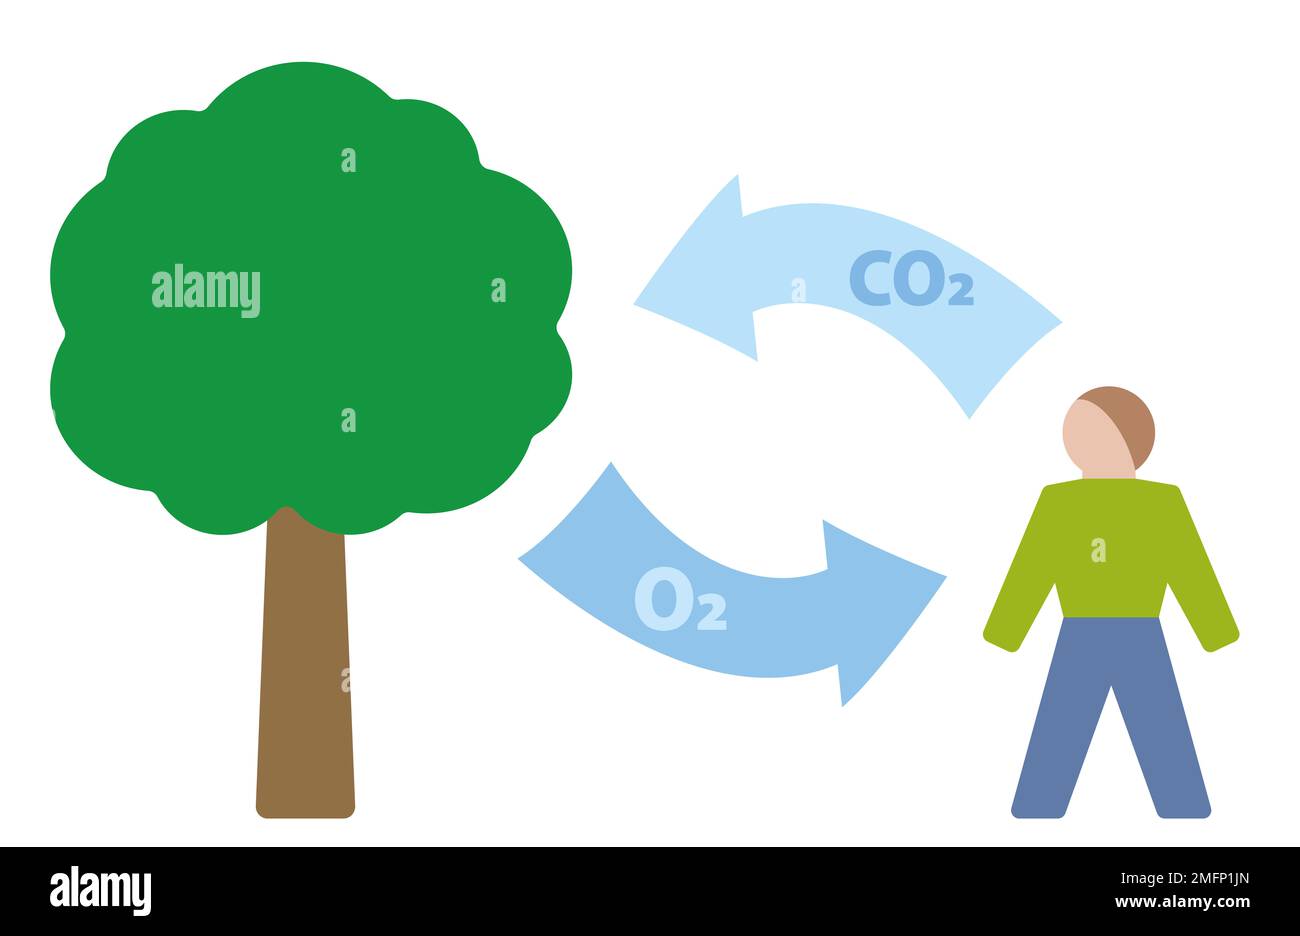 Carbon cycle symbol. Carbon dioxide oxygen exchange between human being and tree. Exhalation and absorption of CO2 Carbon dioxide. Stock Photo